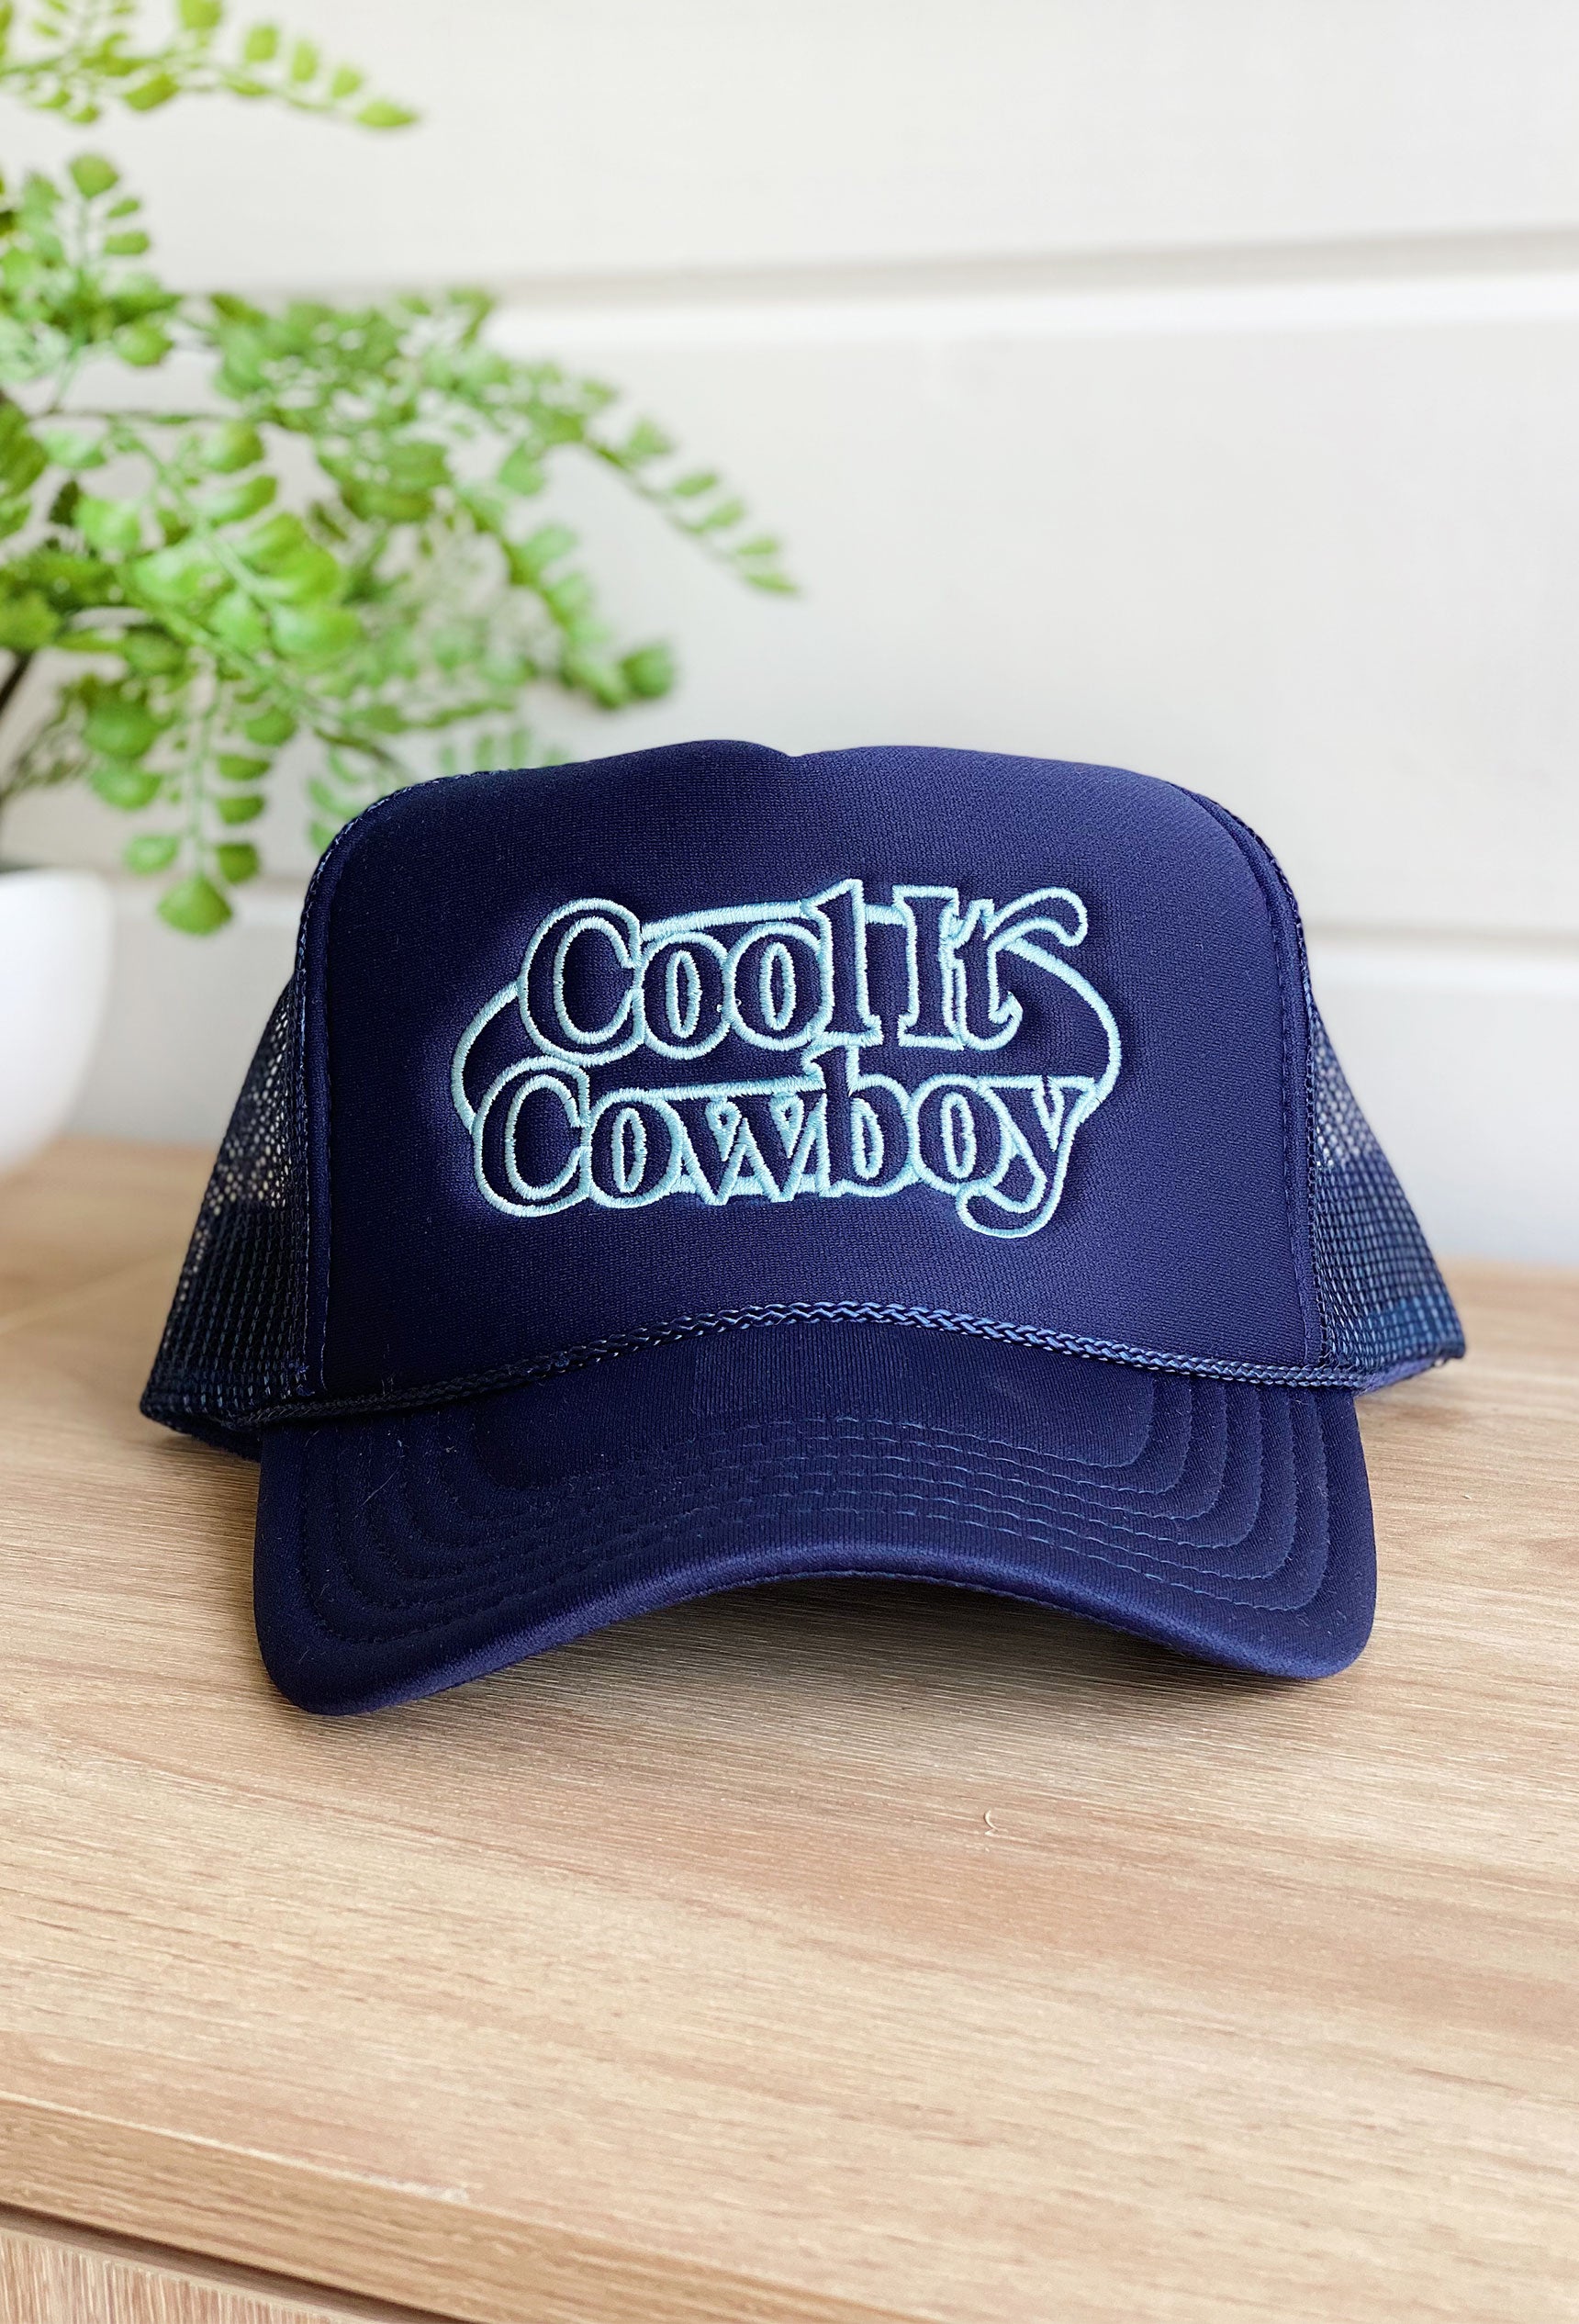 Charlie Southern: Blue Cool It Cowboy Trucker Hat, navy trucker hat with lettering embroidered in light blue that says "cool it cowboy"